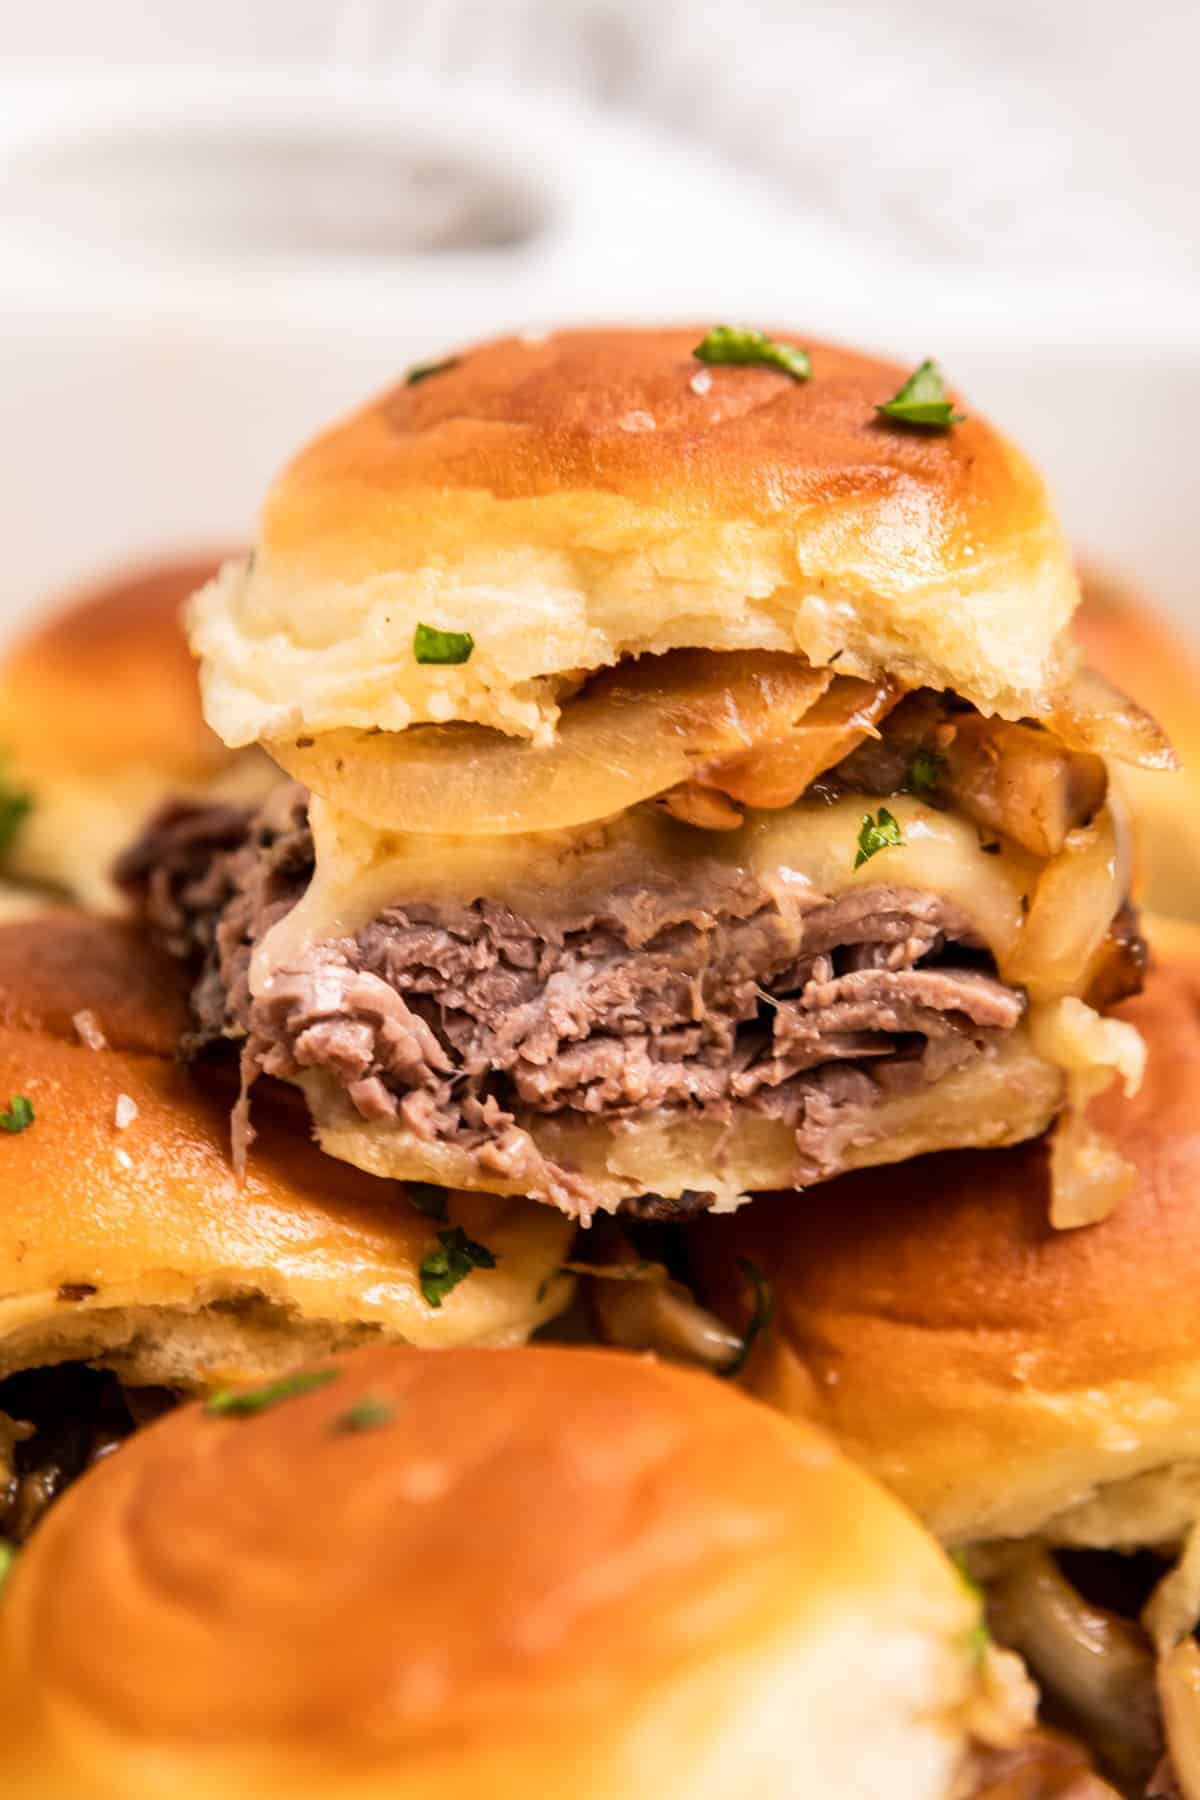 French dip slider with roast beef, provolone, onion and mushroom stacked on other sandwiches.